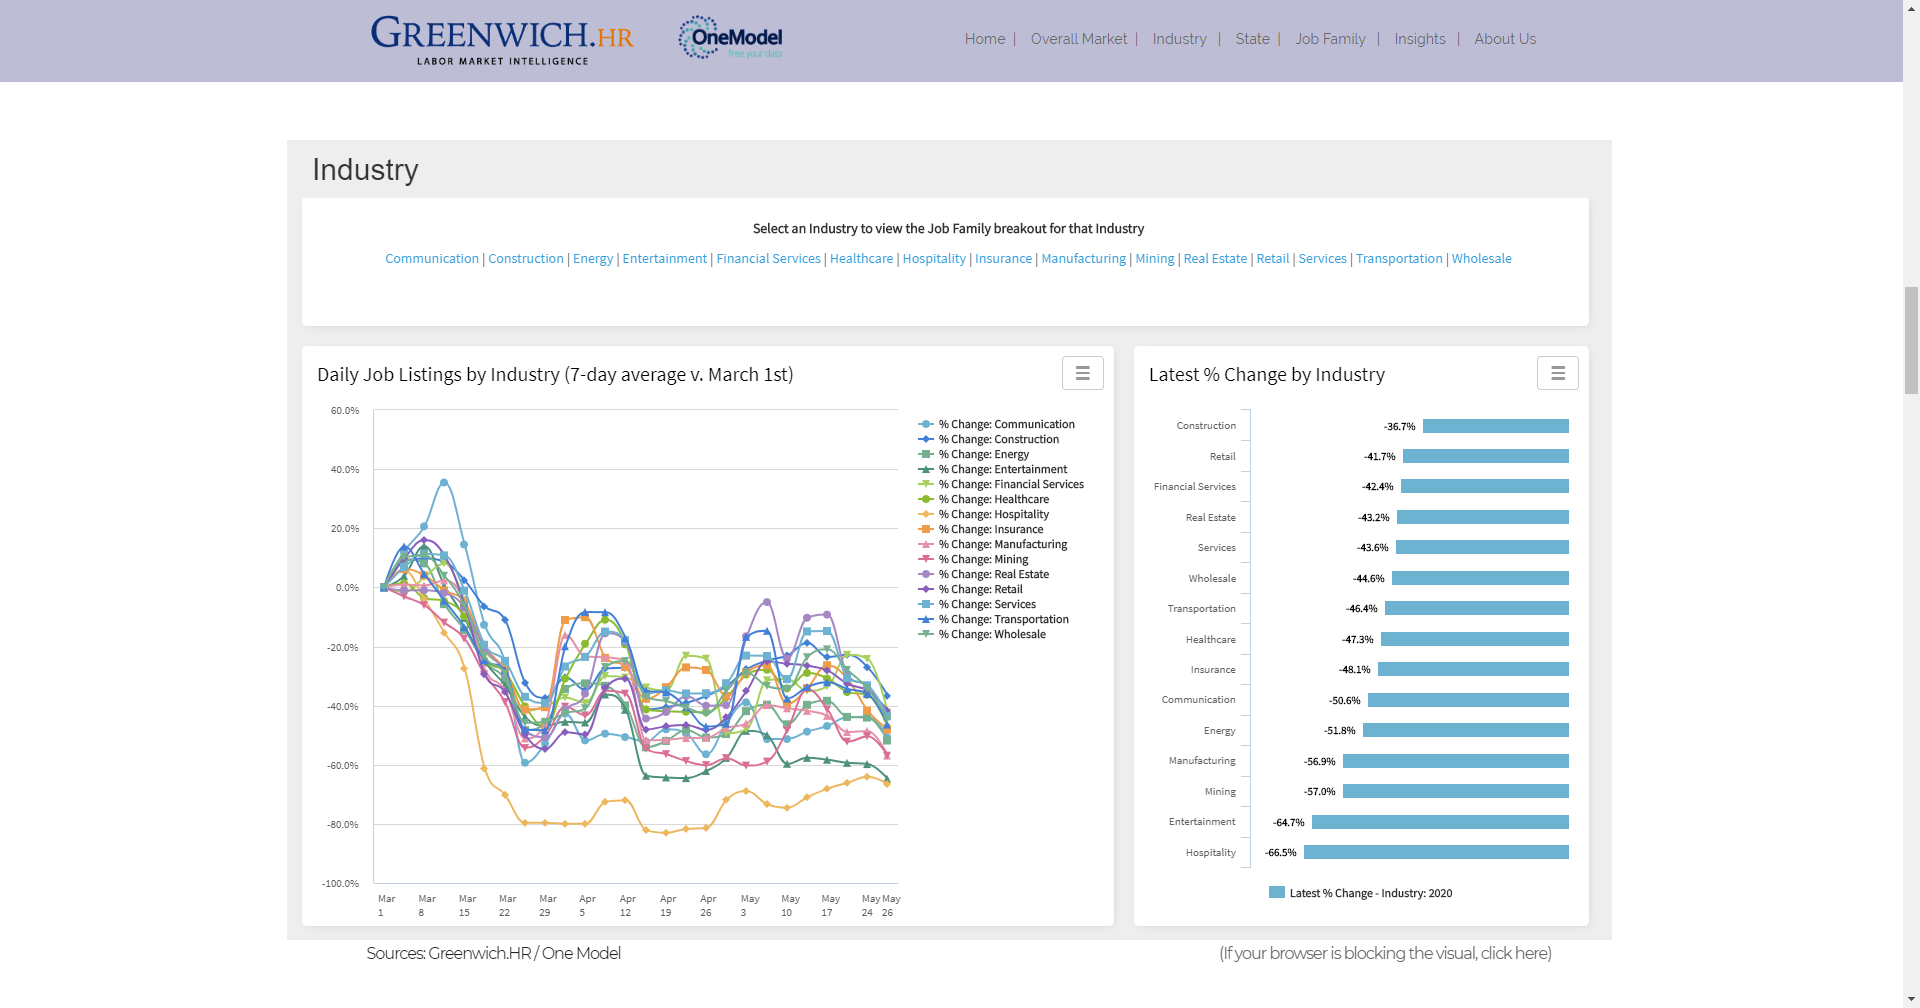 One Model and Greenwich HR Create New Daily US Job Listings Website To Track COVID Job Impacts and Recovery